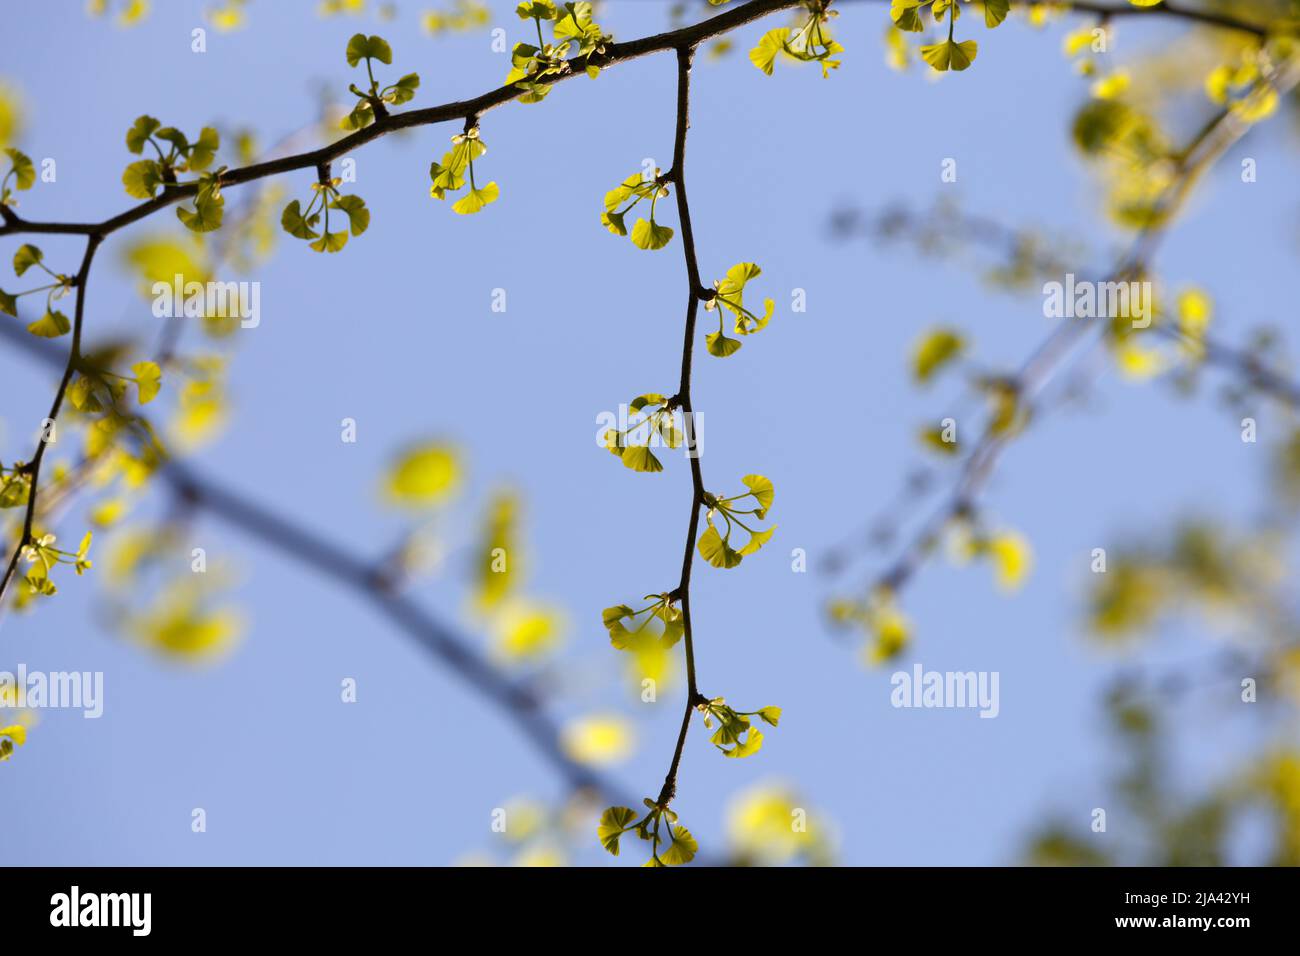 Ginkgo biloba. First spring foliage. Young small green leaves in bright contrasting light with a blurry background and blue sky Stock Photo